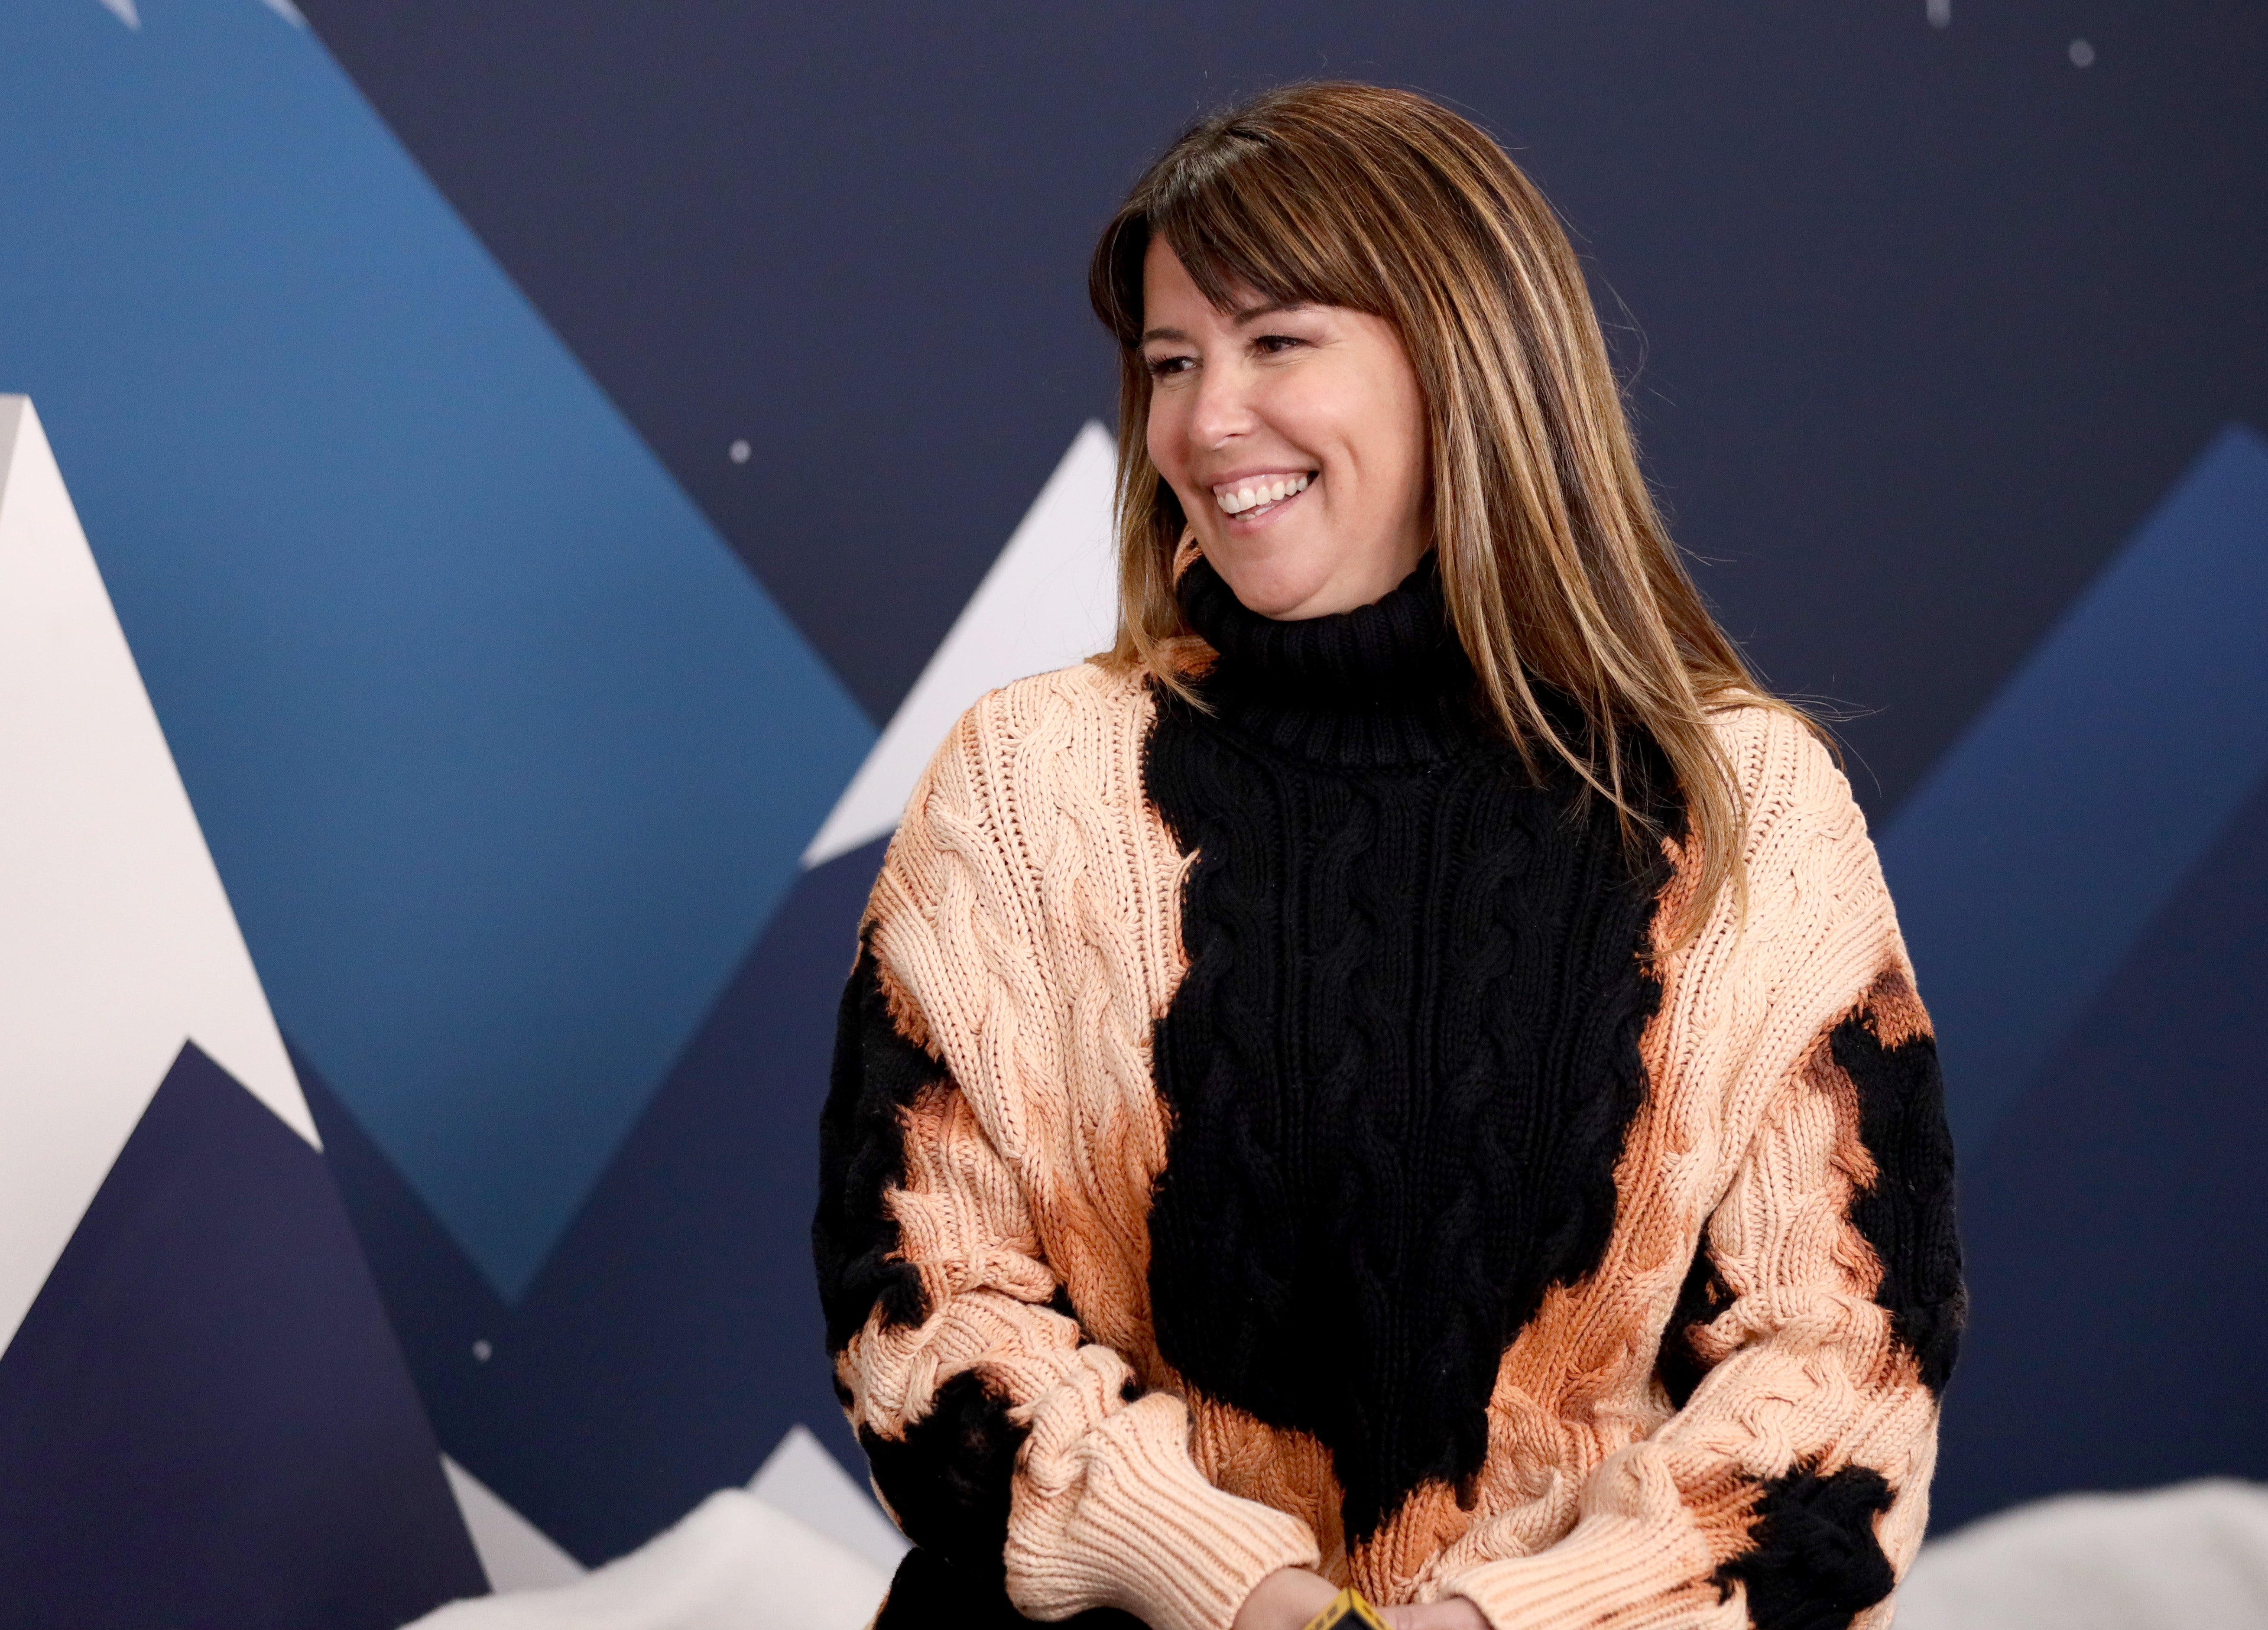 Wonder director: Patty Jenkins has now made two game-changing films